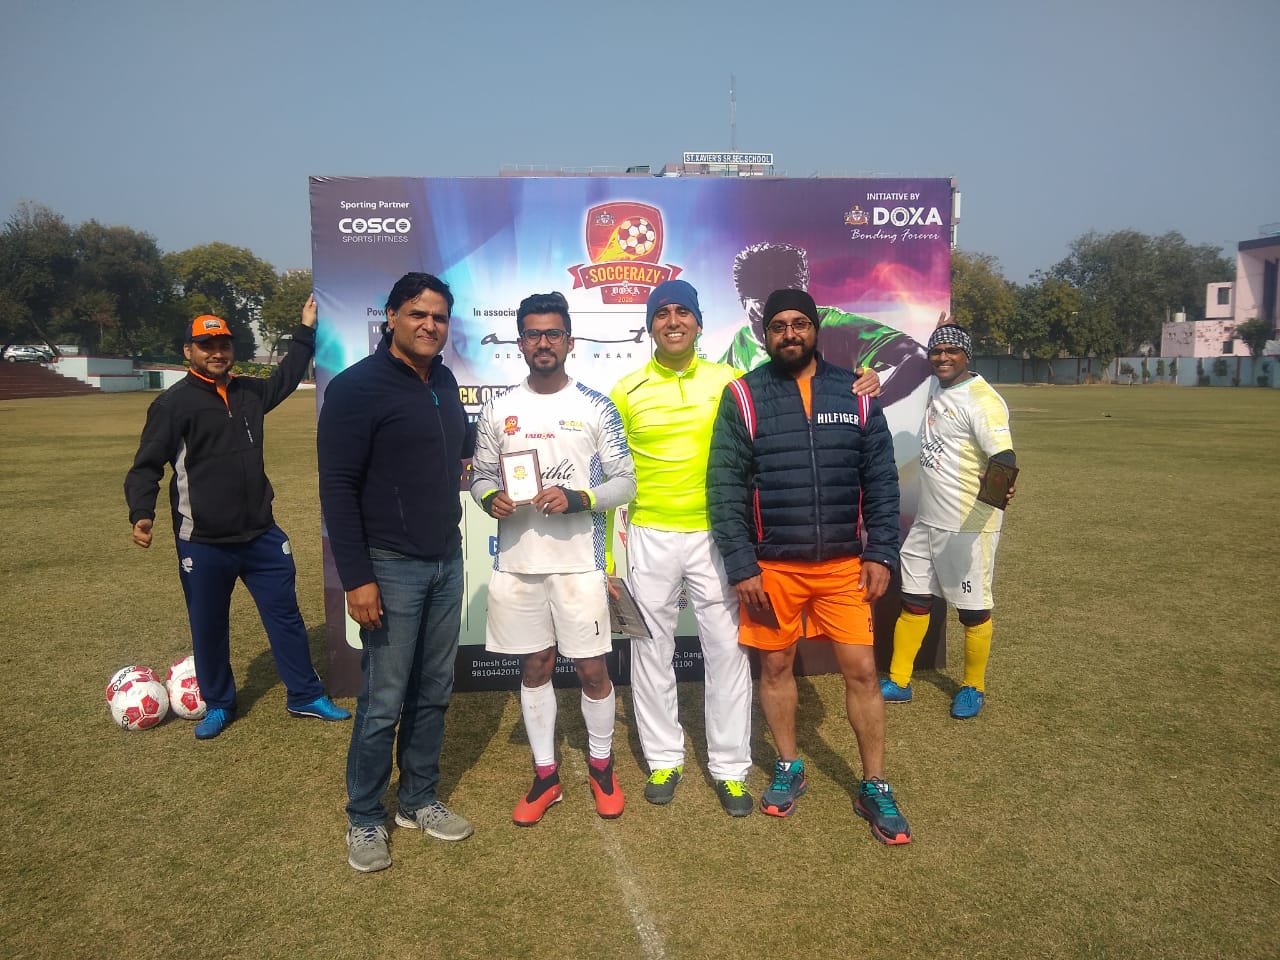 Soccerazy kicks off 4th Edition - Day 3 - 19th Jan, 2020<br>
<br>
Day 3 of the action packed league..<br>
<br>
Guaranteed excitement on & off the field!